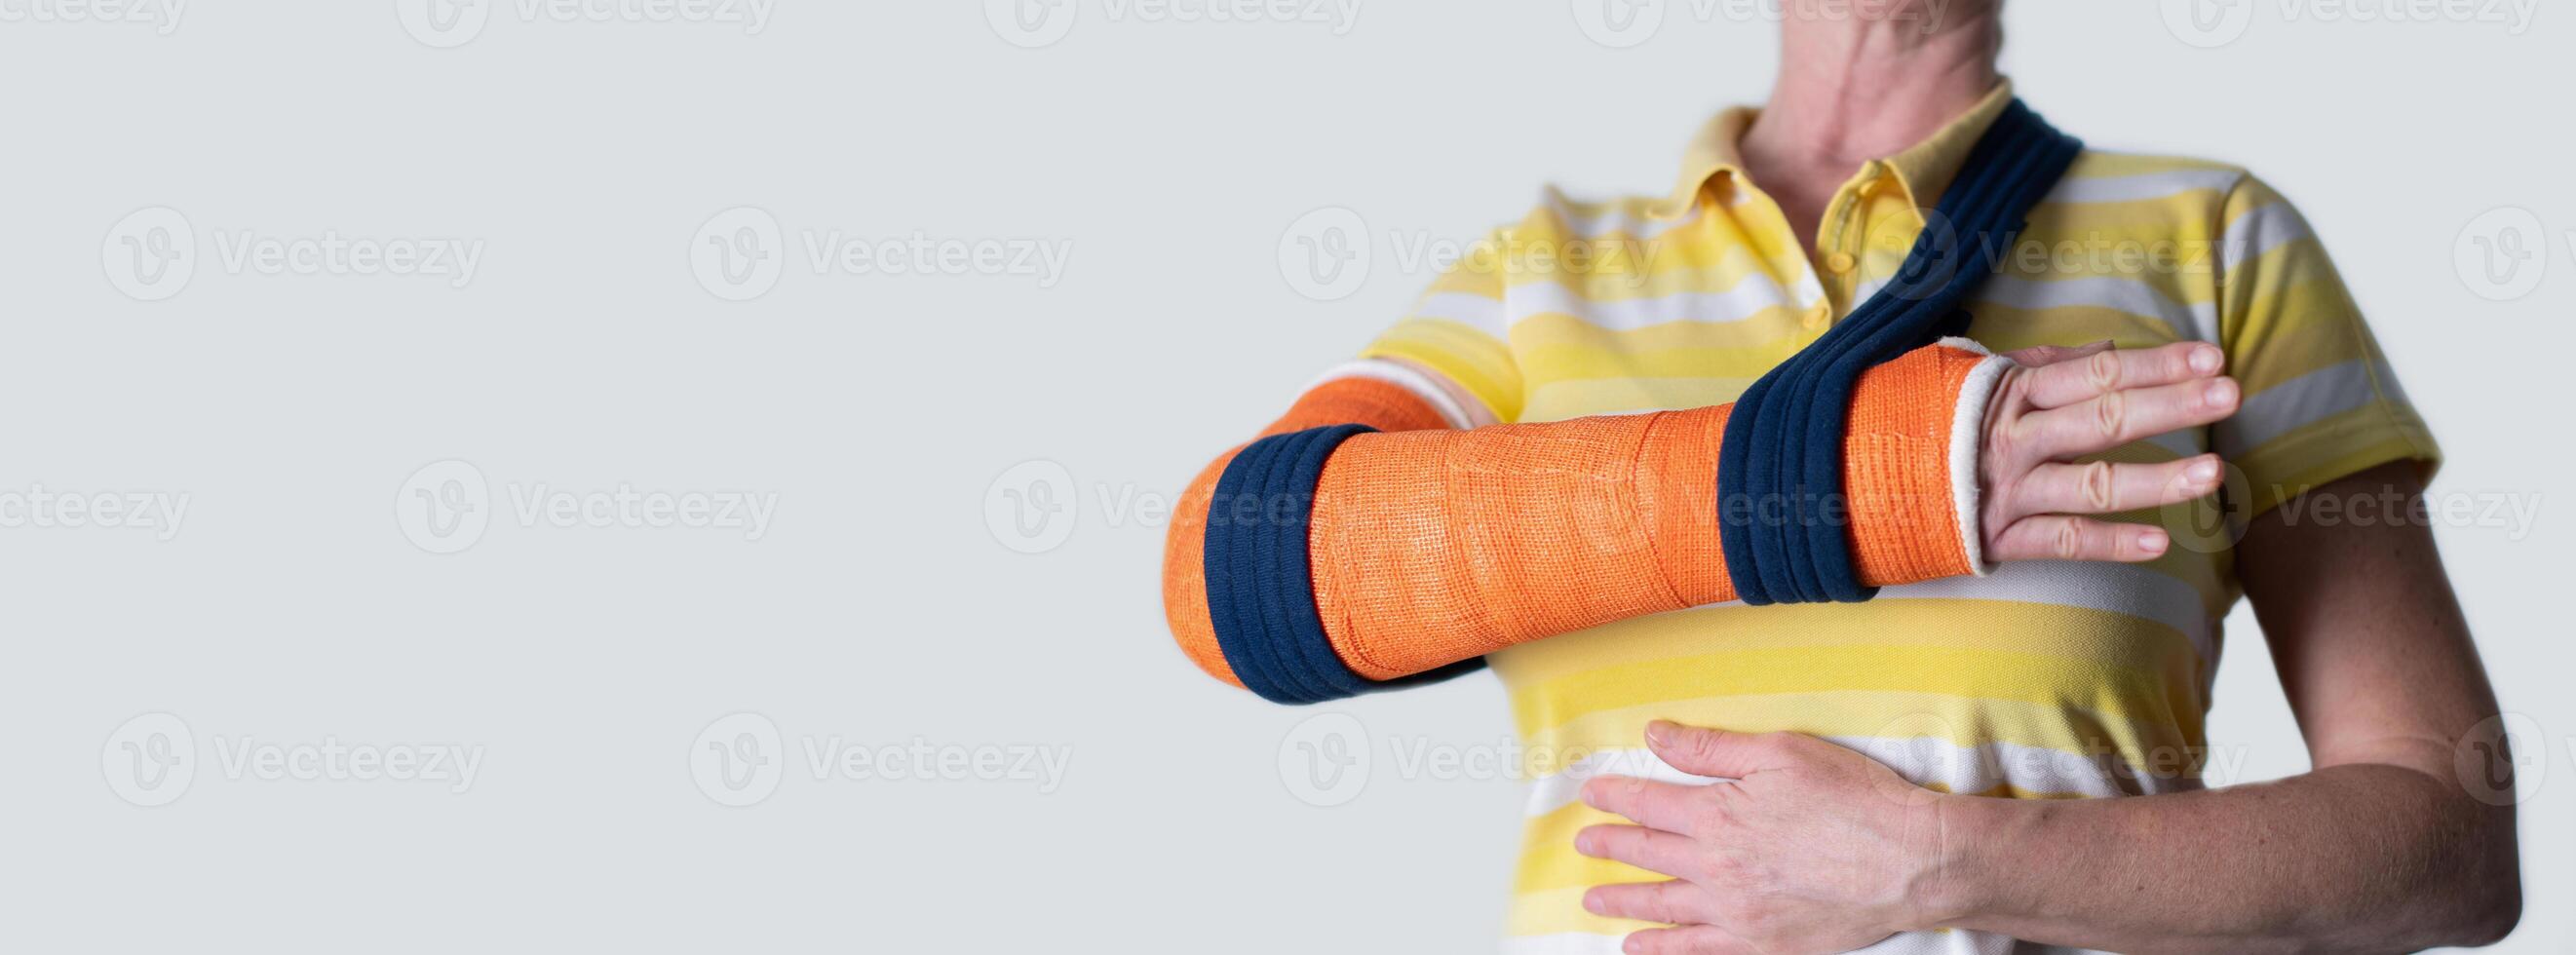 woman with a broken right arm in Fiberglass casts to hold broken bones in place until they heal, modern treatments, photo